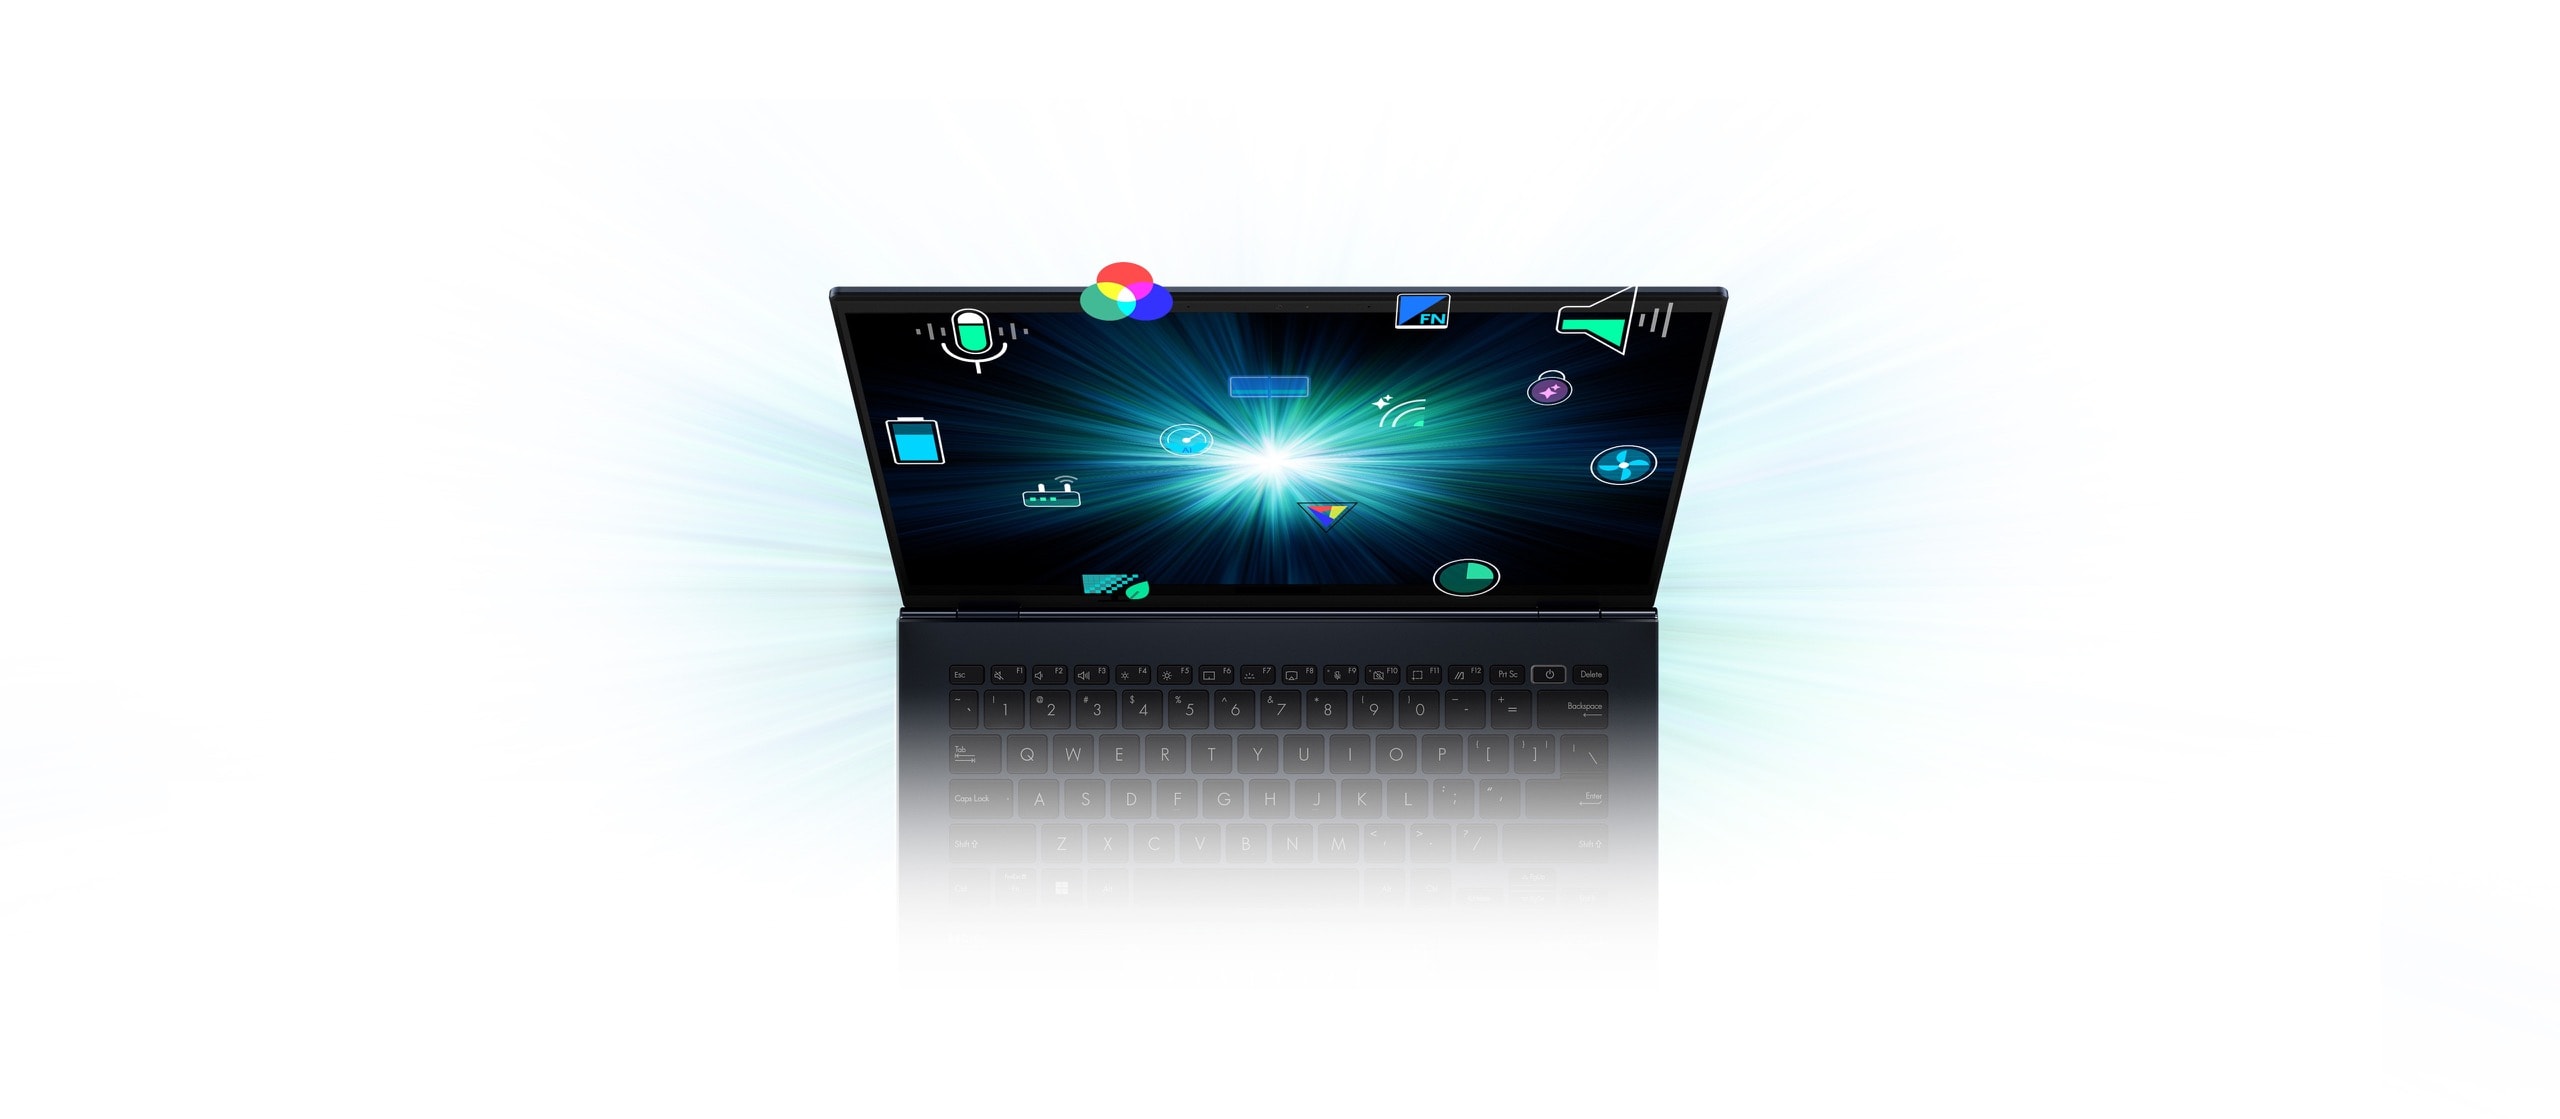 A laptop viewed from the front with a starburst graphic on the screen surrounded by app icons.